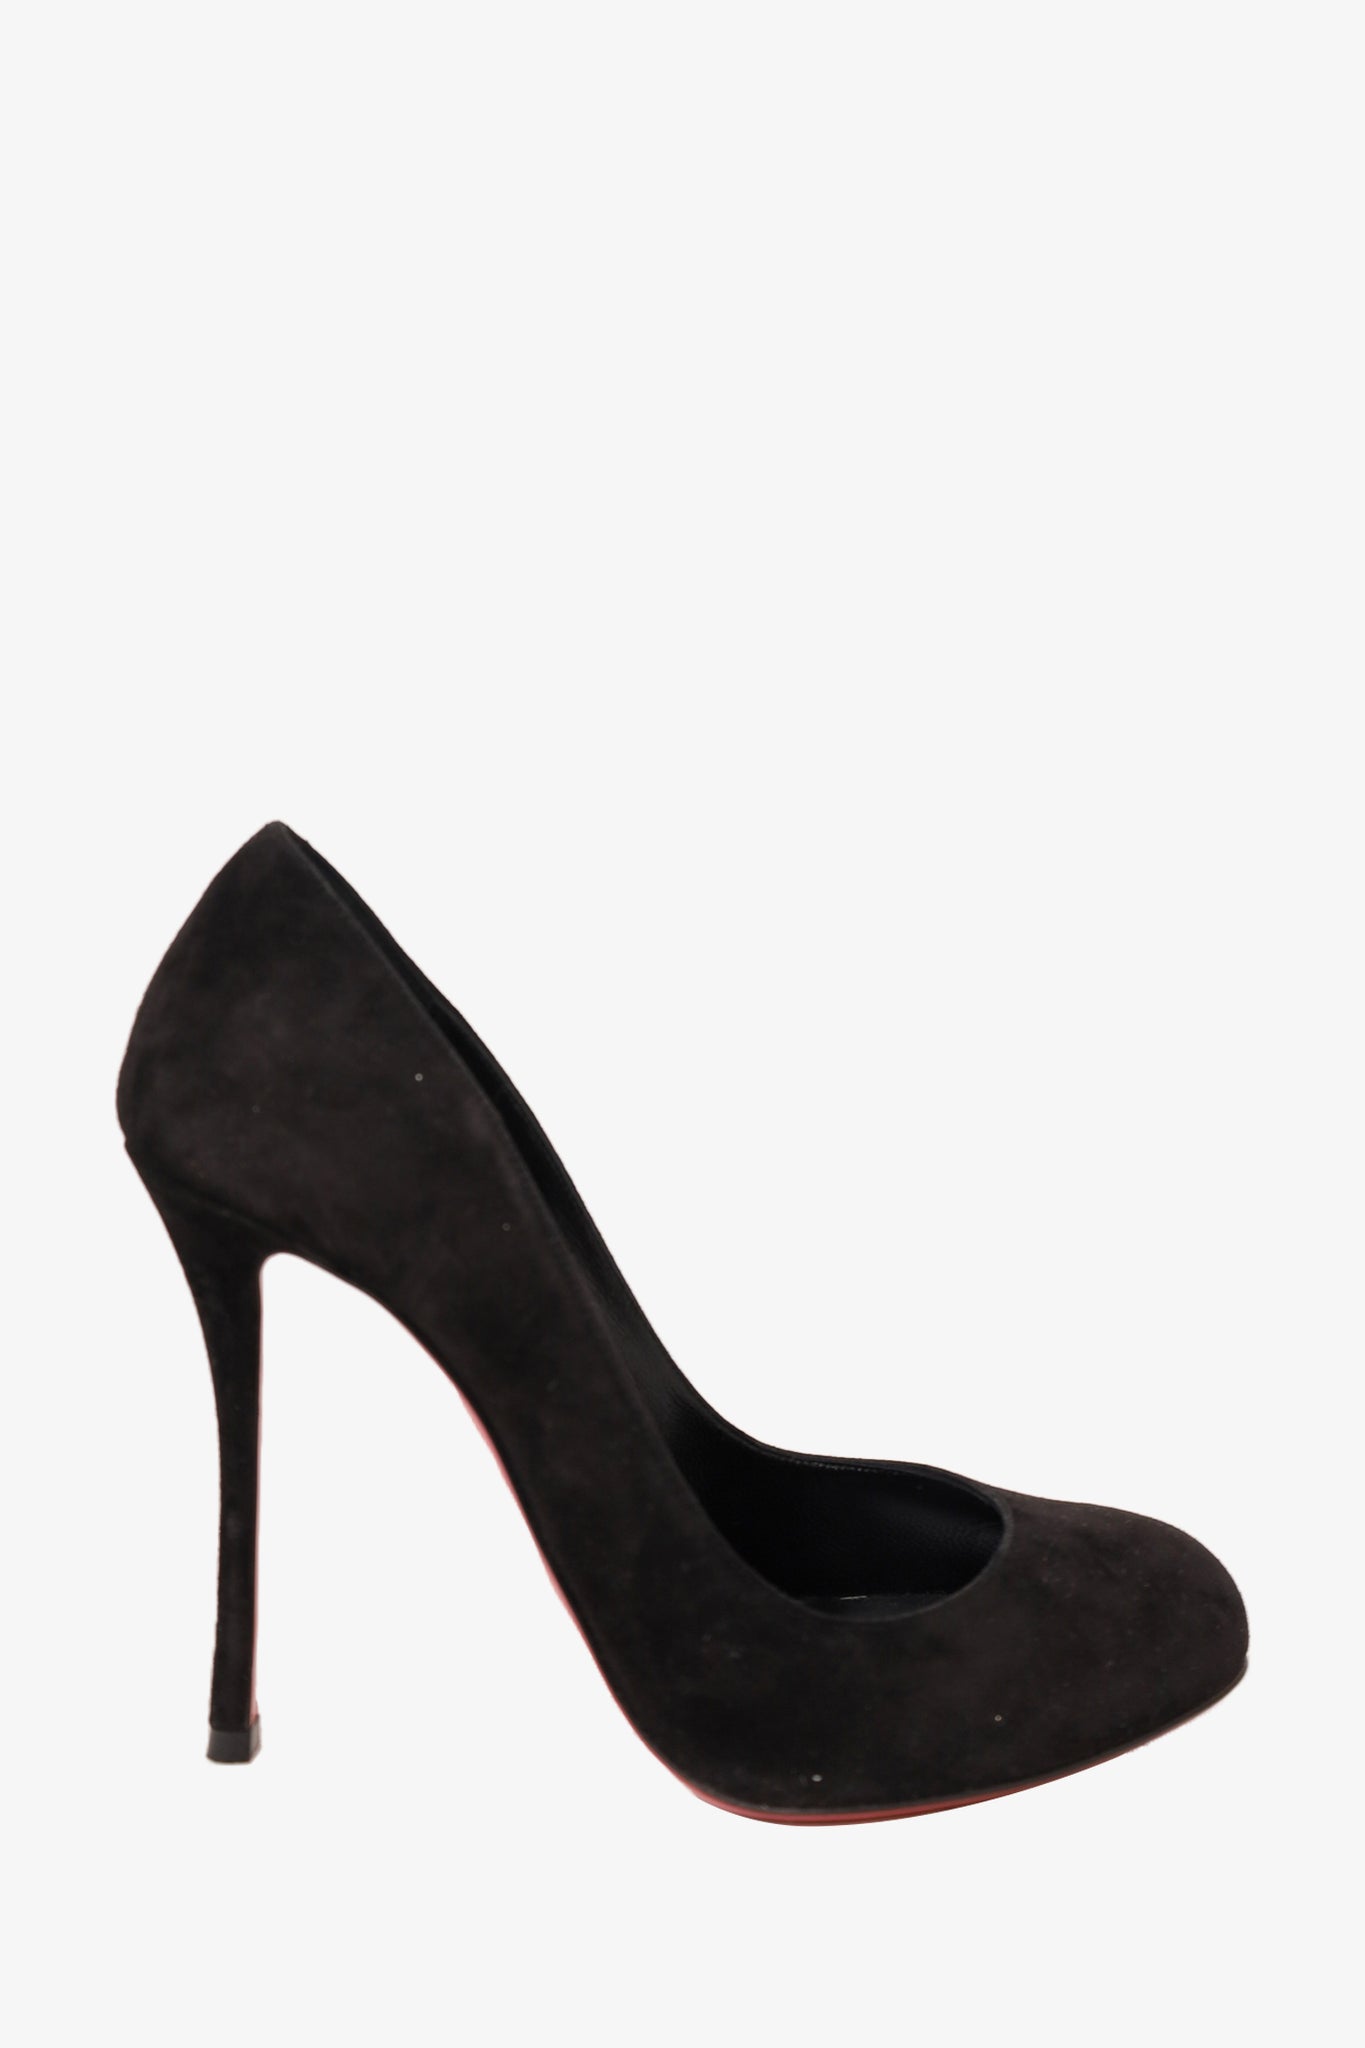 Christian Louboutin Open-toe Lace Up Heel Sandals in Black | Lyst